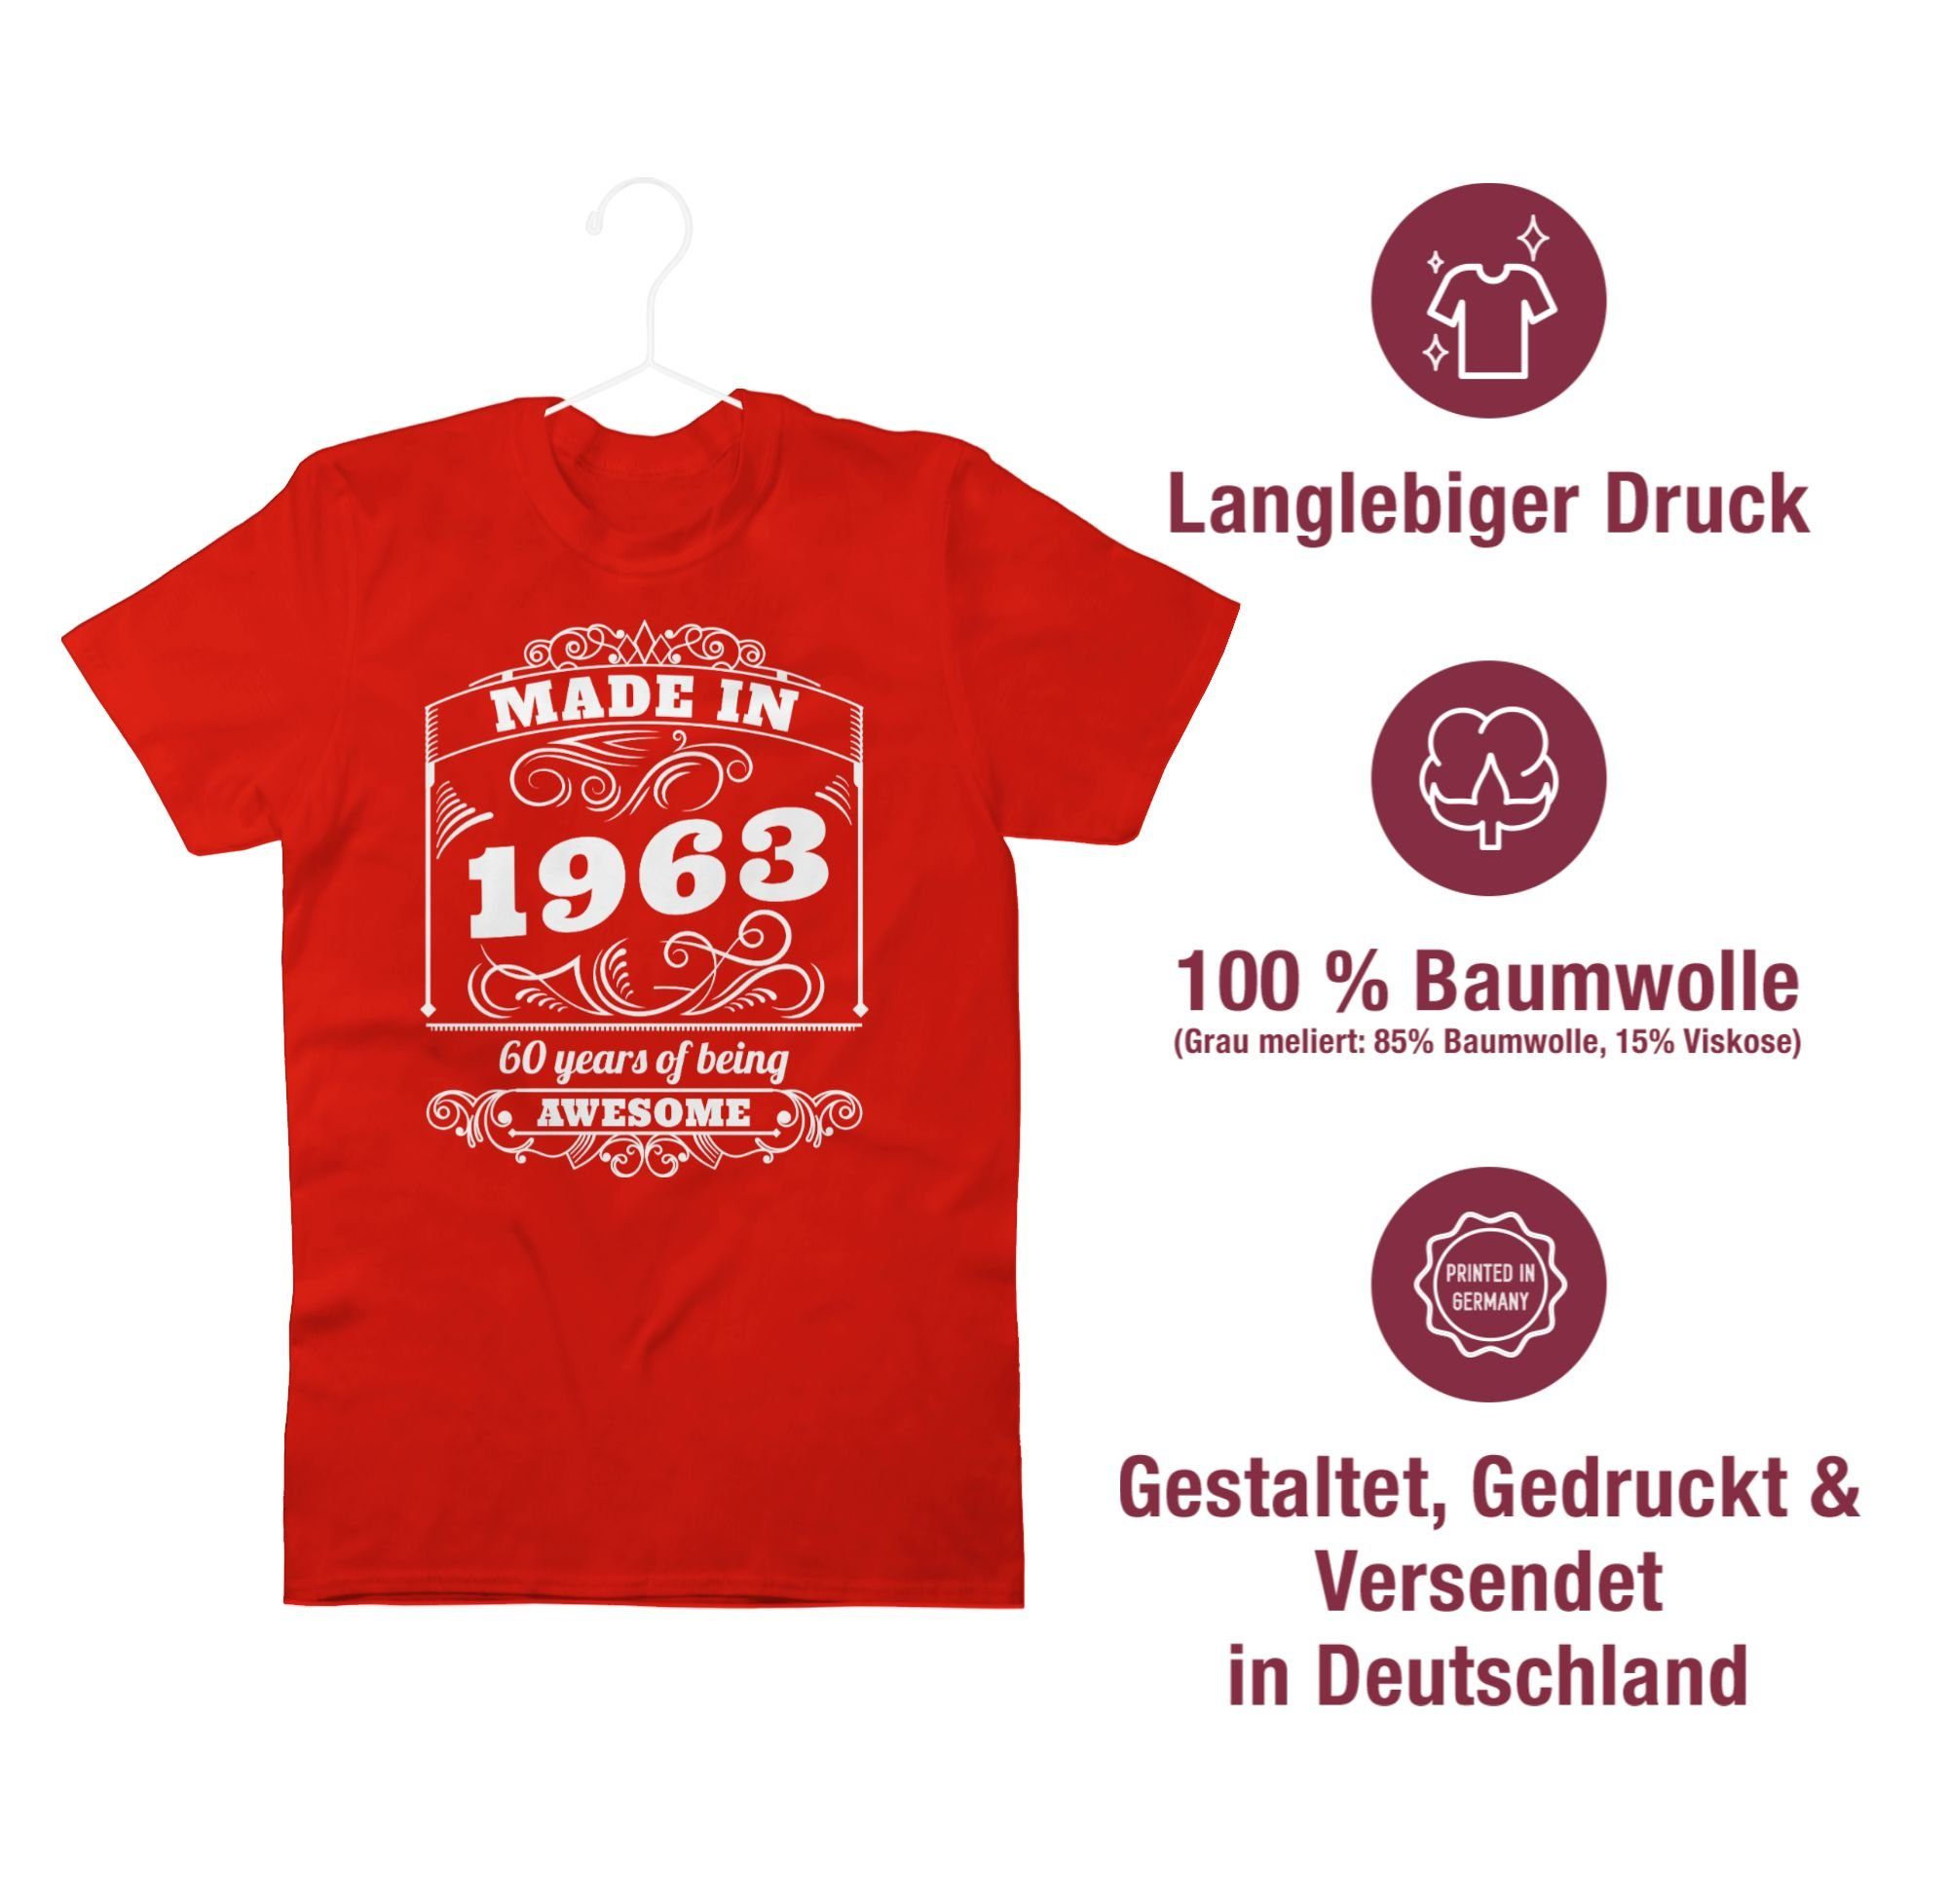 Shirtracer T-Shirt Made in of 1963 Sixty 60. being awesome Geburtstag Rot 3 years